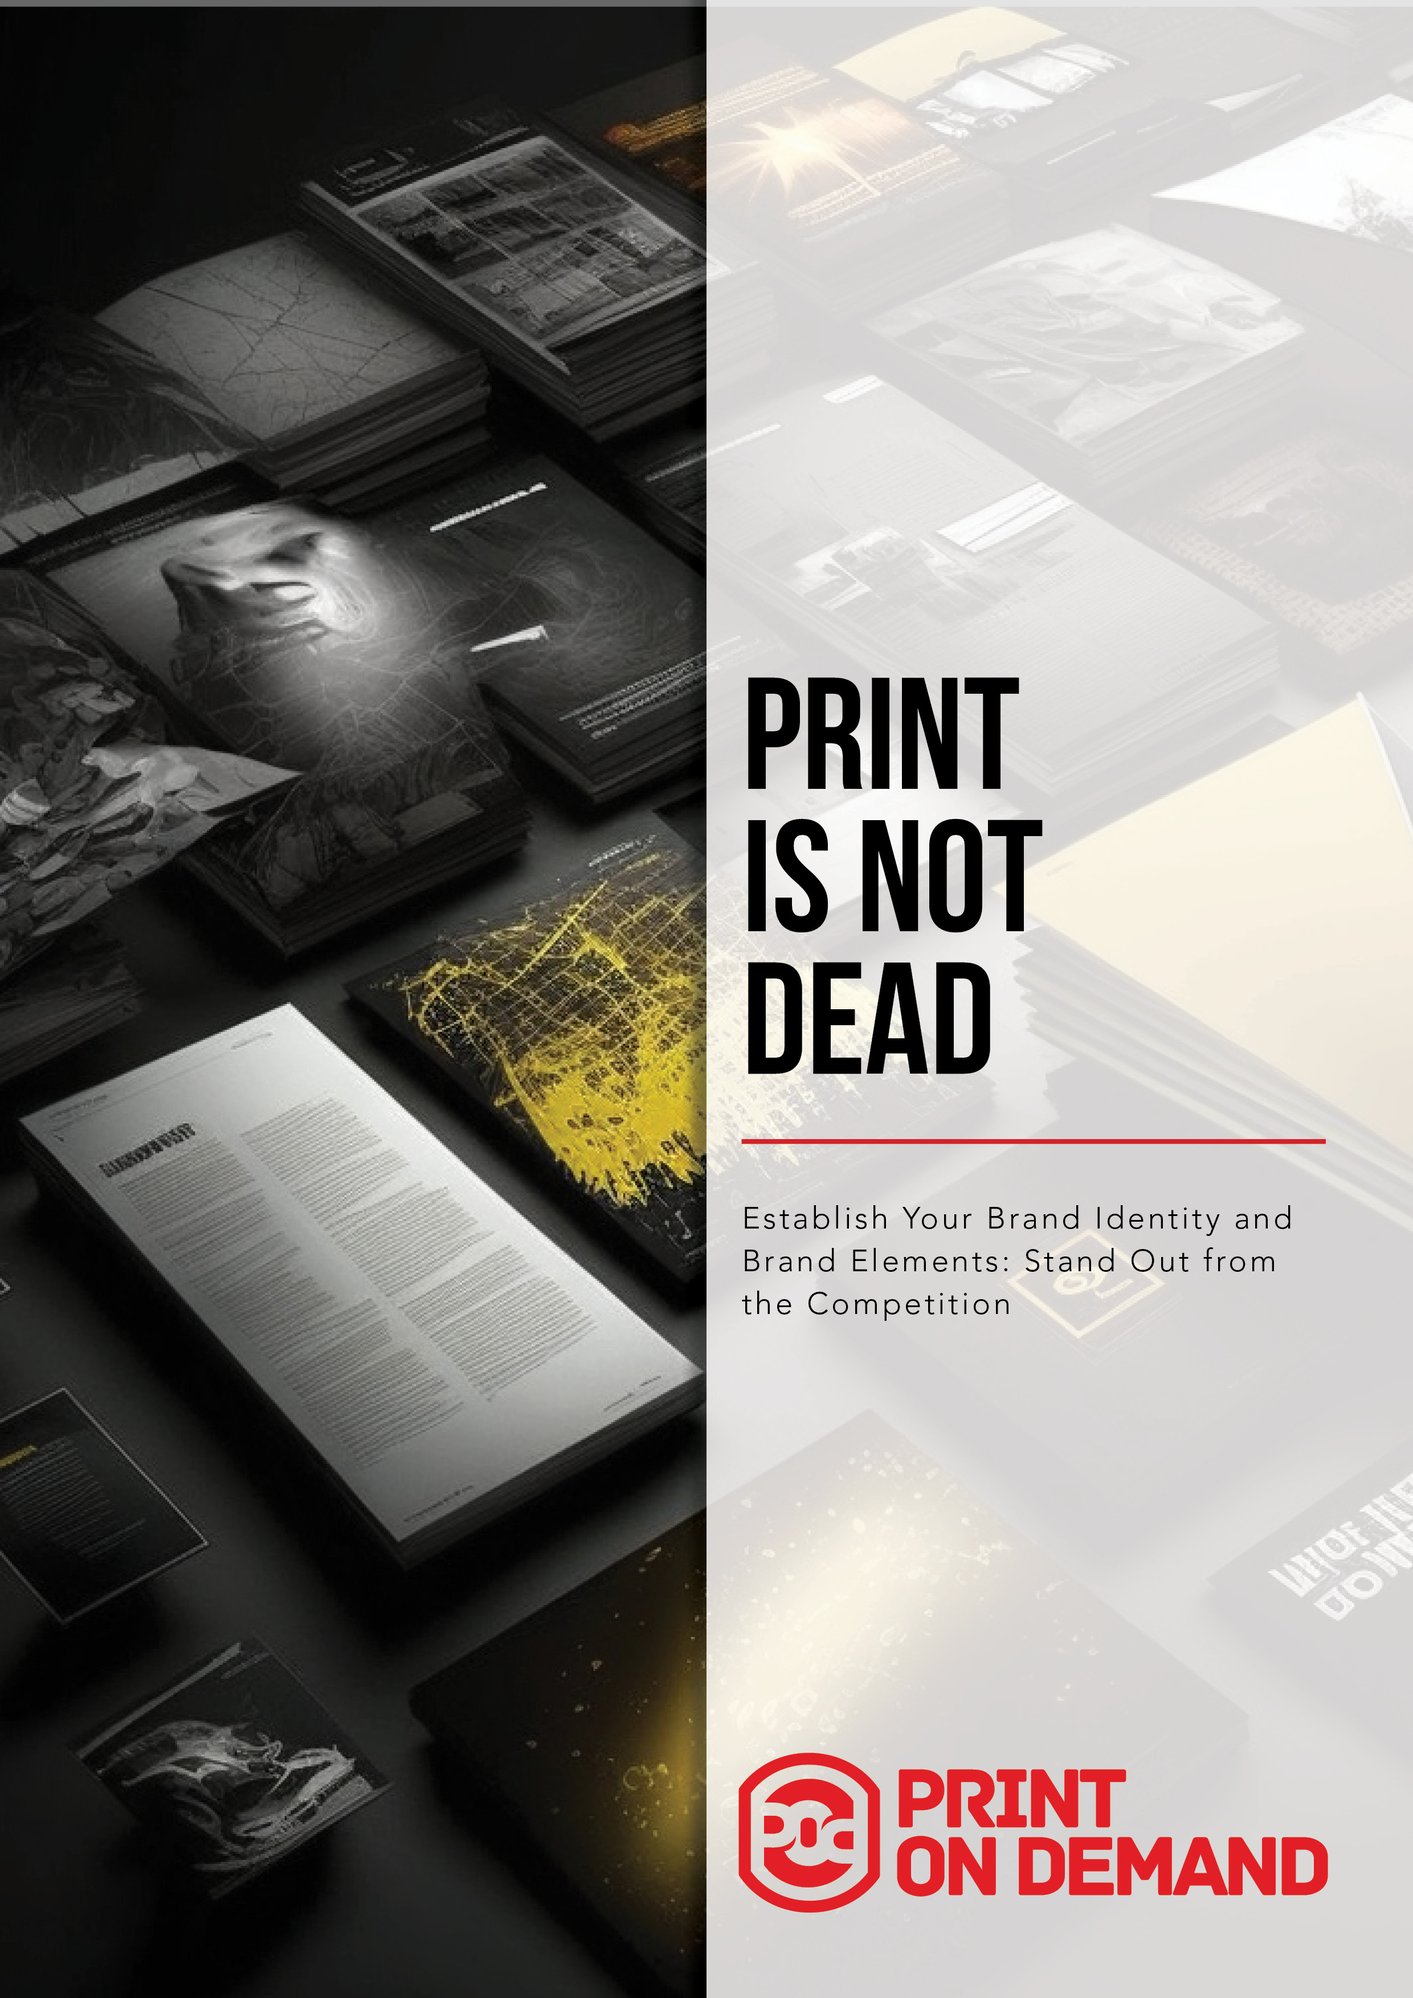 Print_is_not_Dead_-_Establish_Your_Brand_Identity_and_Brand_Elements